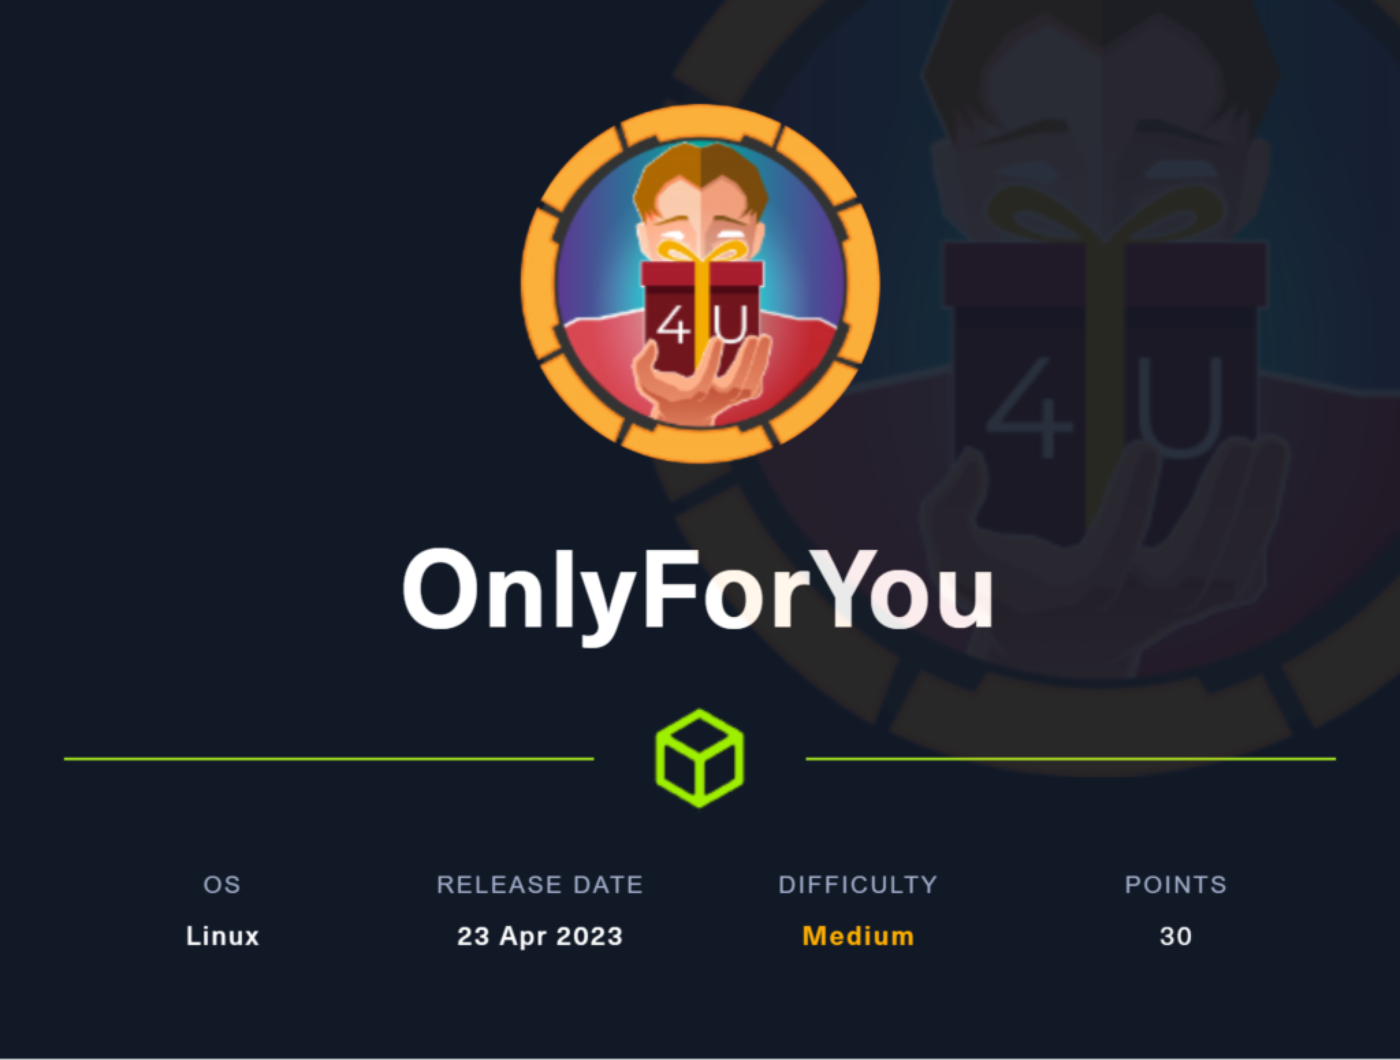 OnlyForYou Writeup from HackTheBox